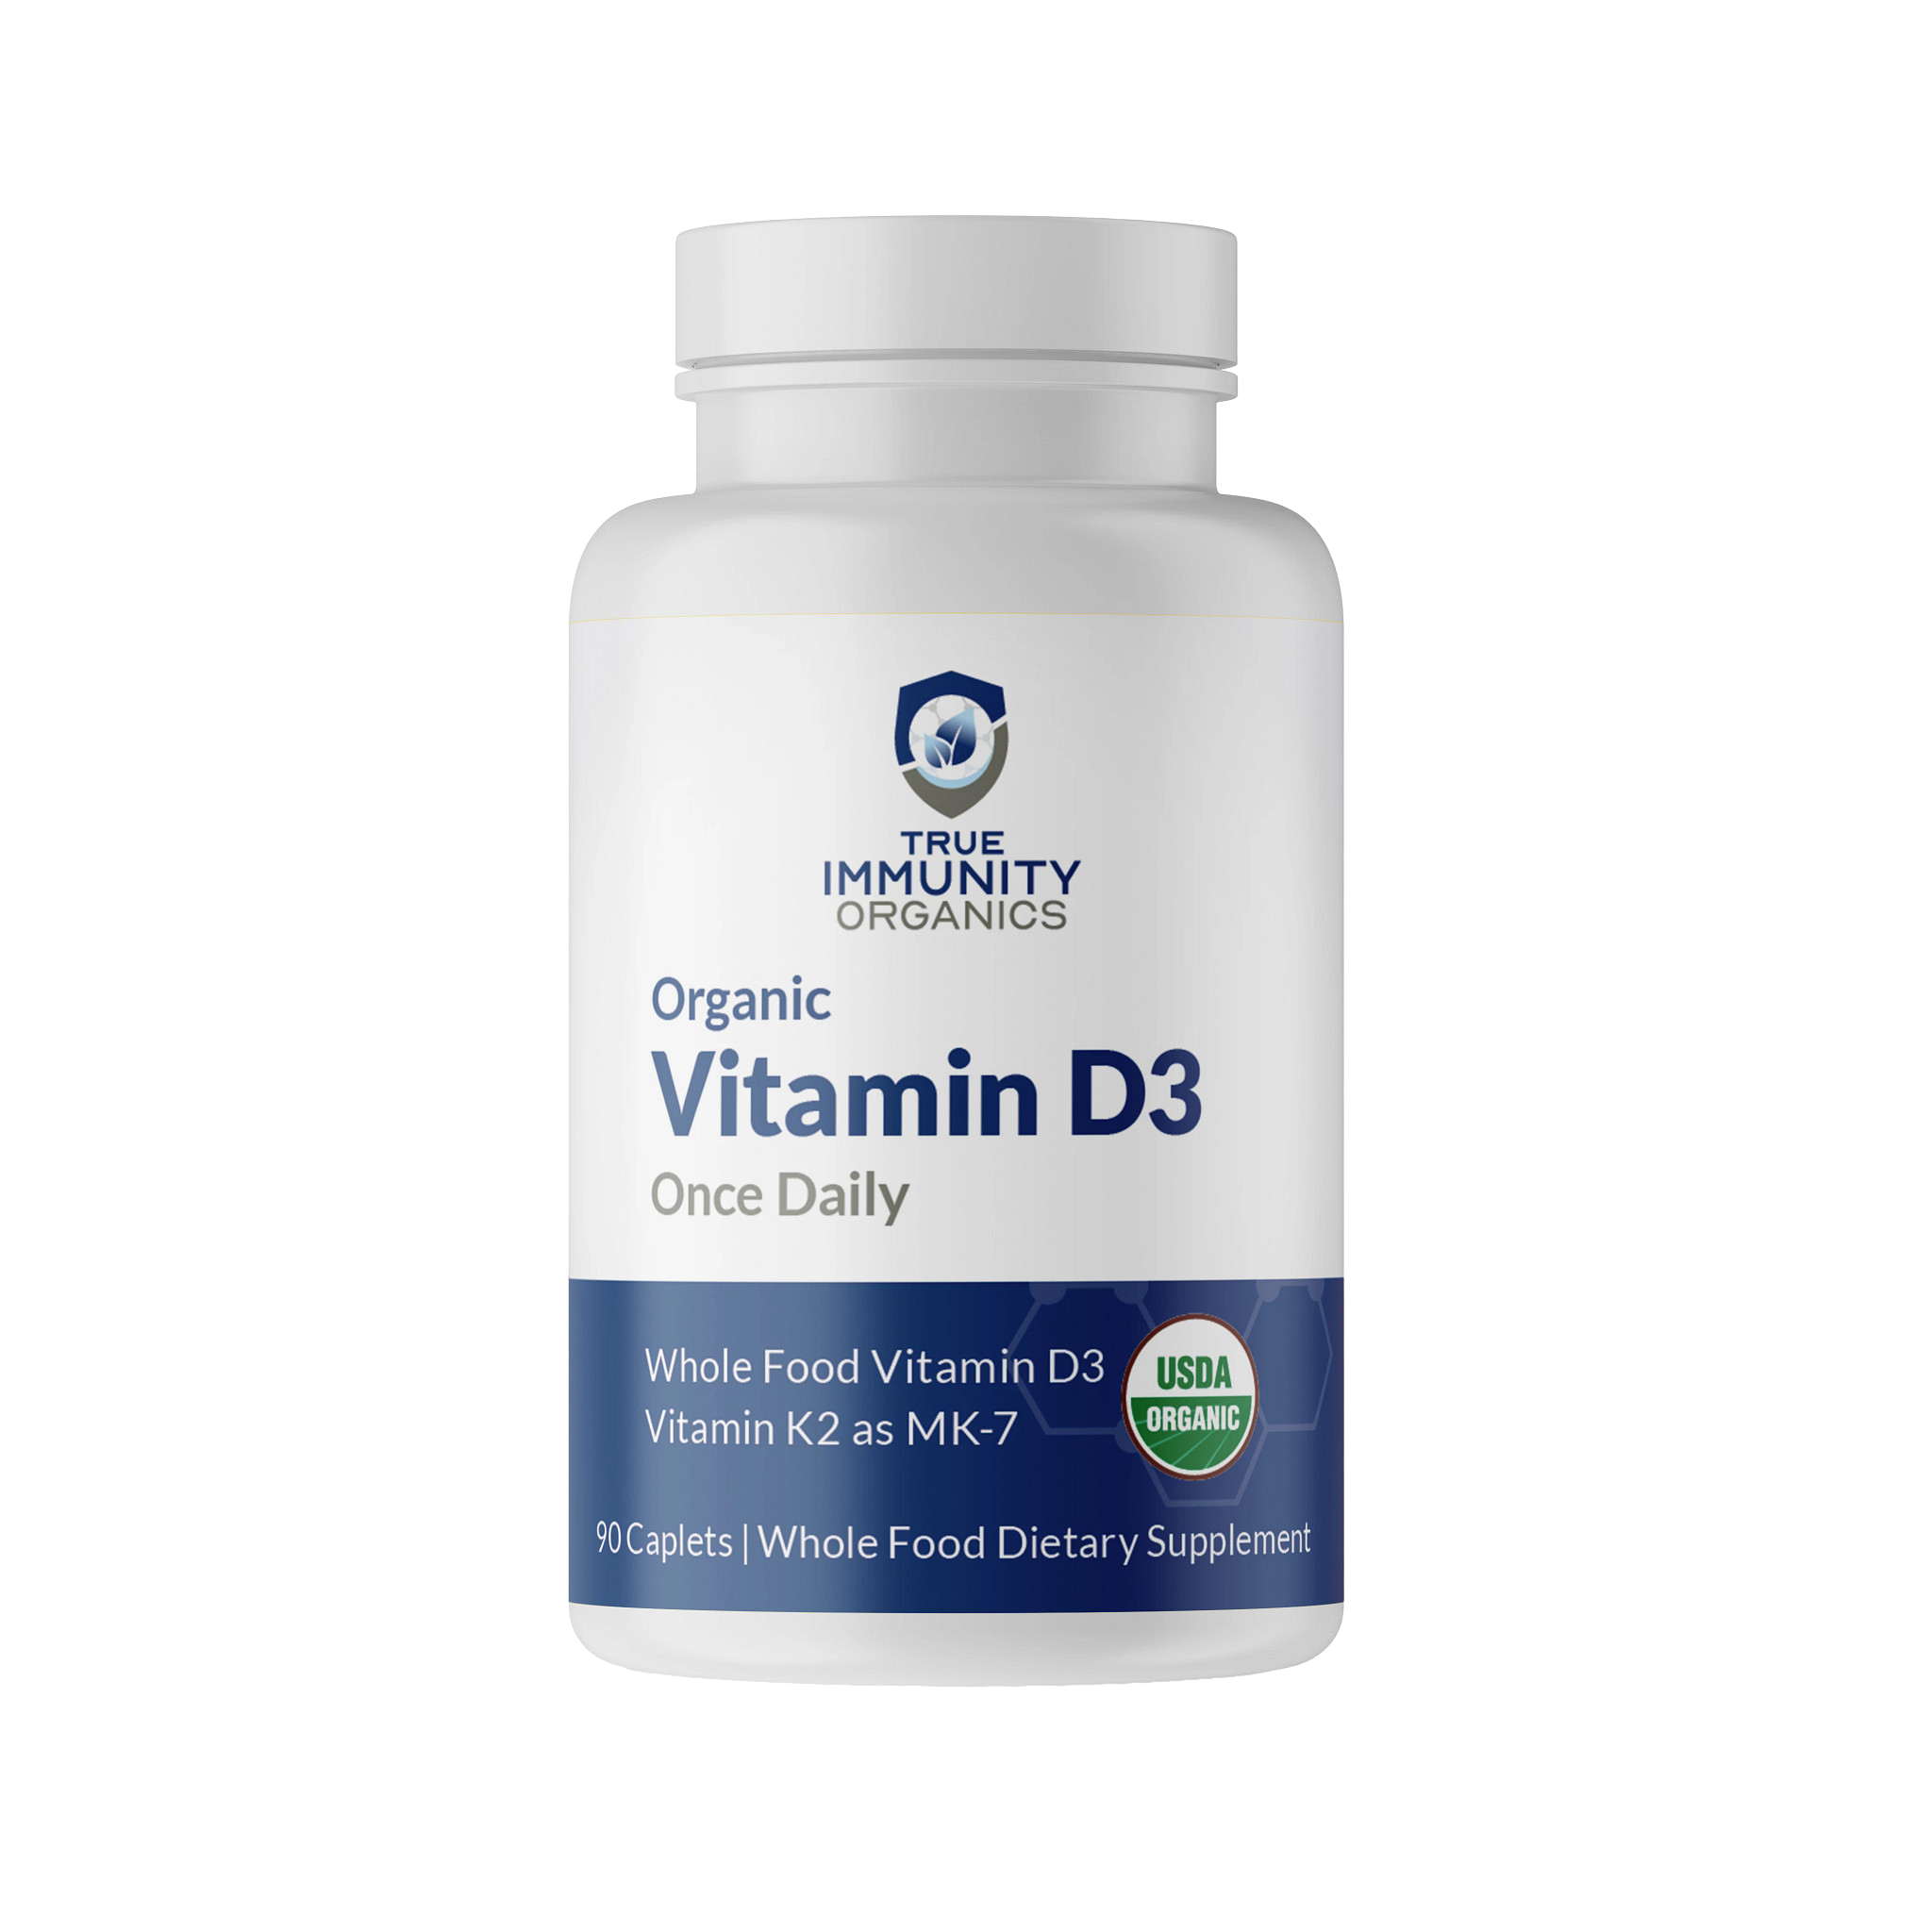 Organic Vitamin D3 Once Daily – Dr. Jockers Store